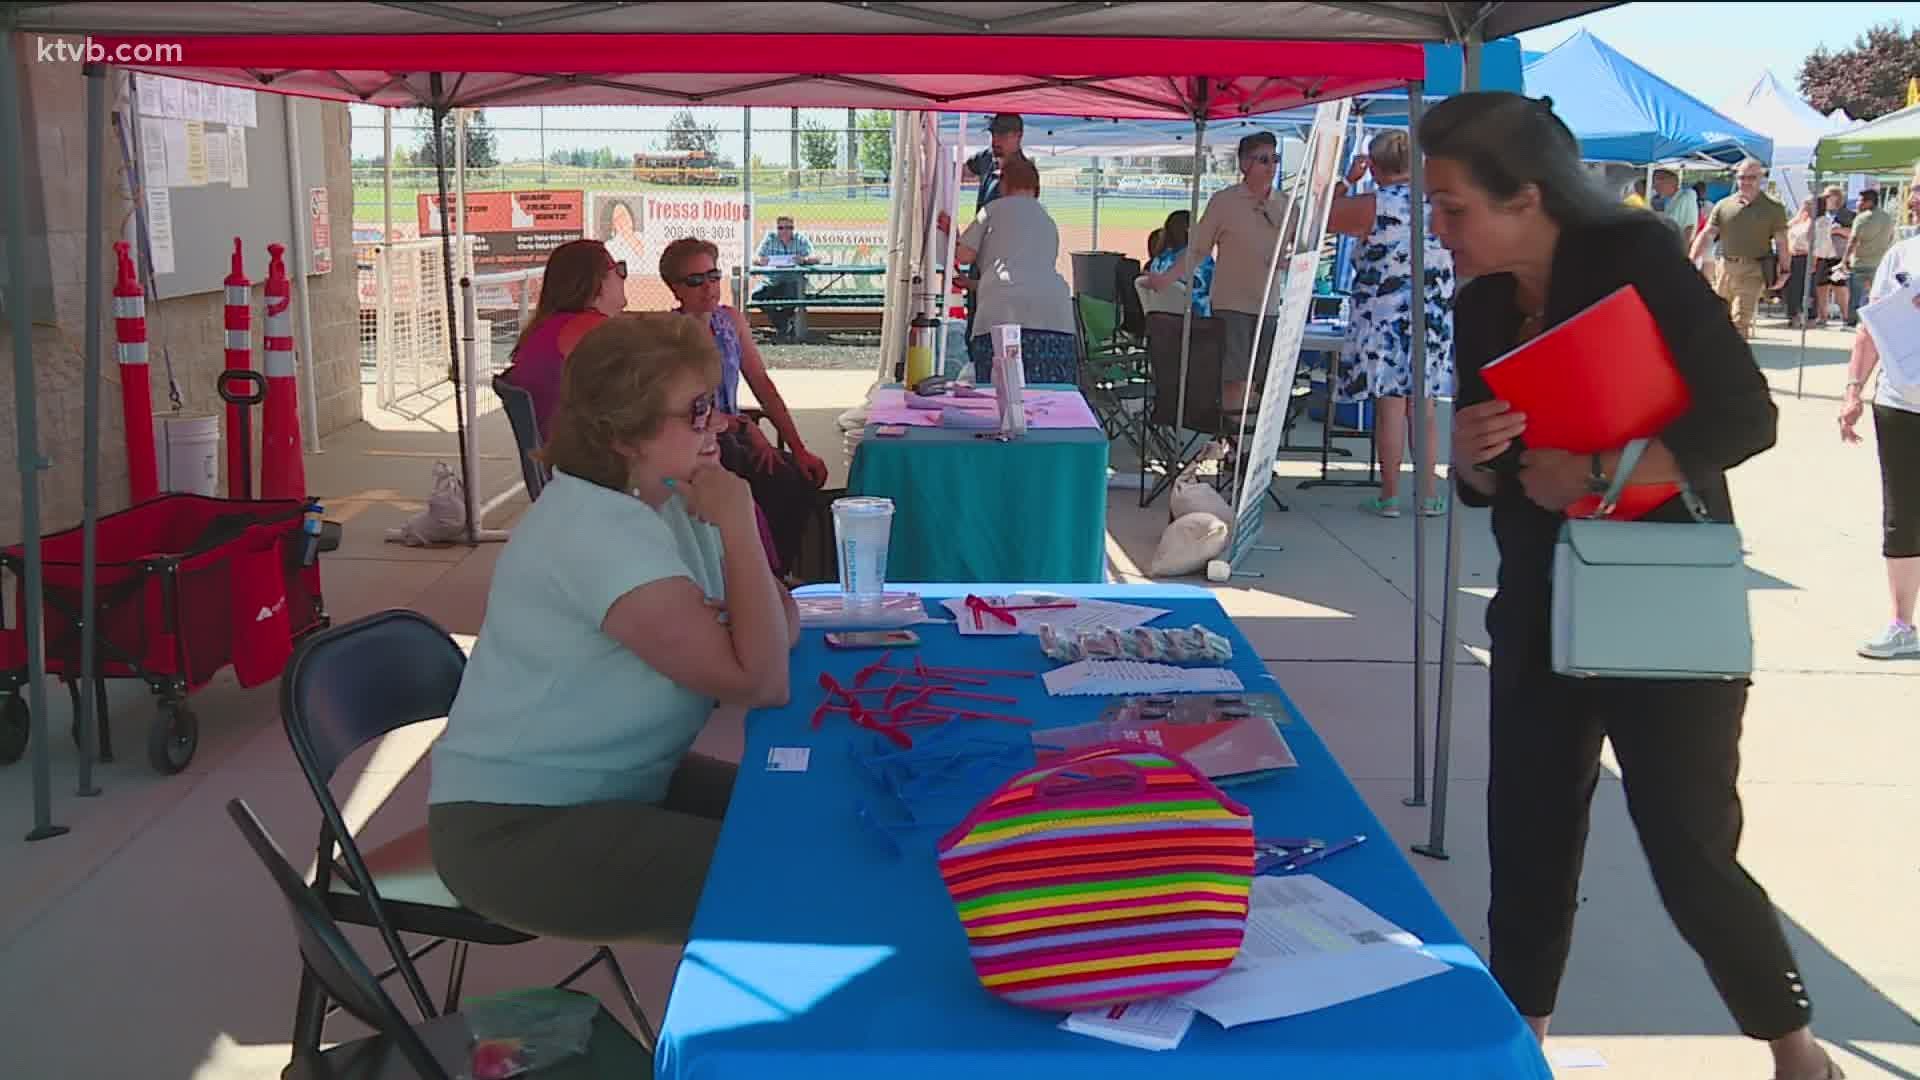 Local employers were looking to hire thousands of new workers at an event in Caldwell.